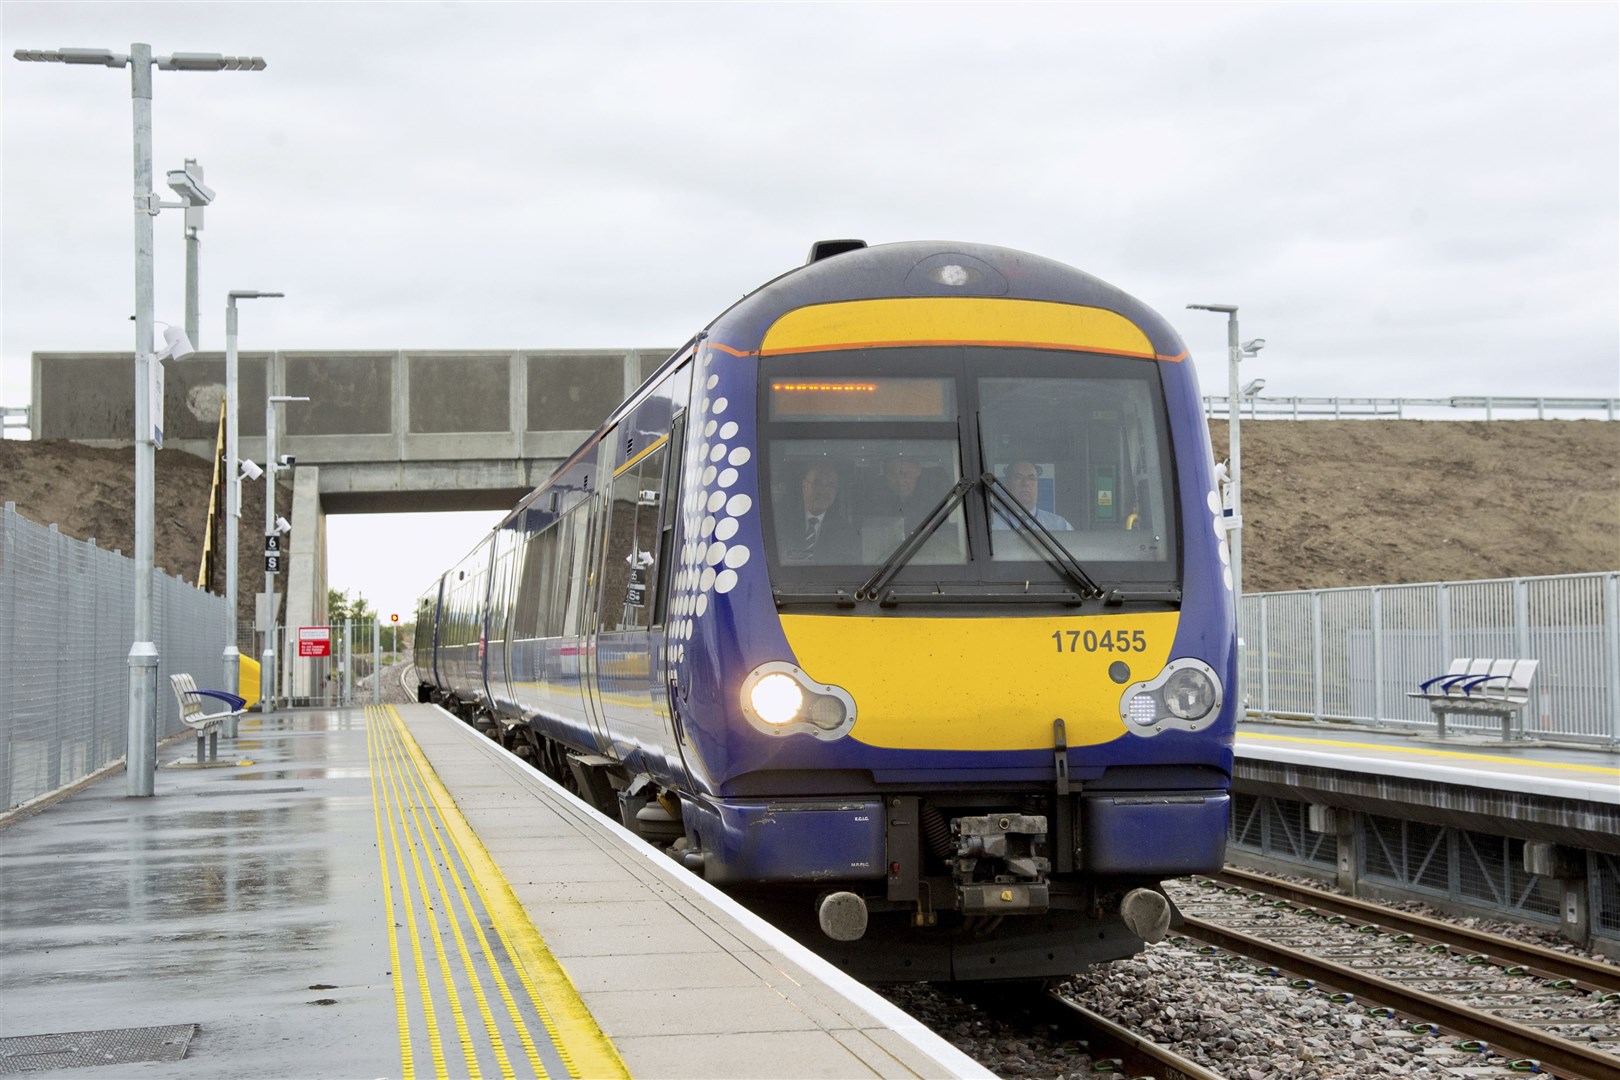 A ScotRail train on the Inverness-Aberdeen railway line, which is among those to have had some services cancelled because of 'severe weather'.